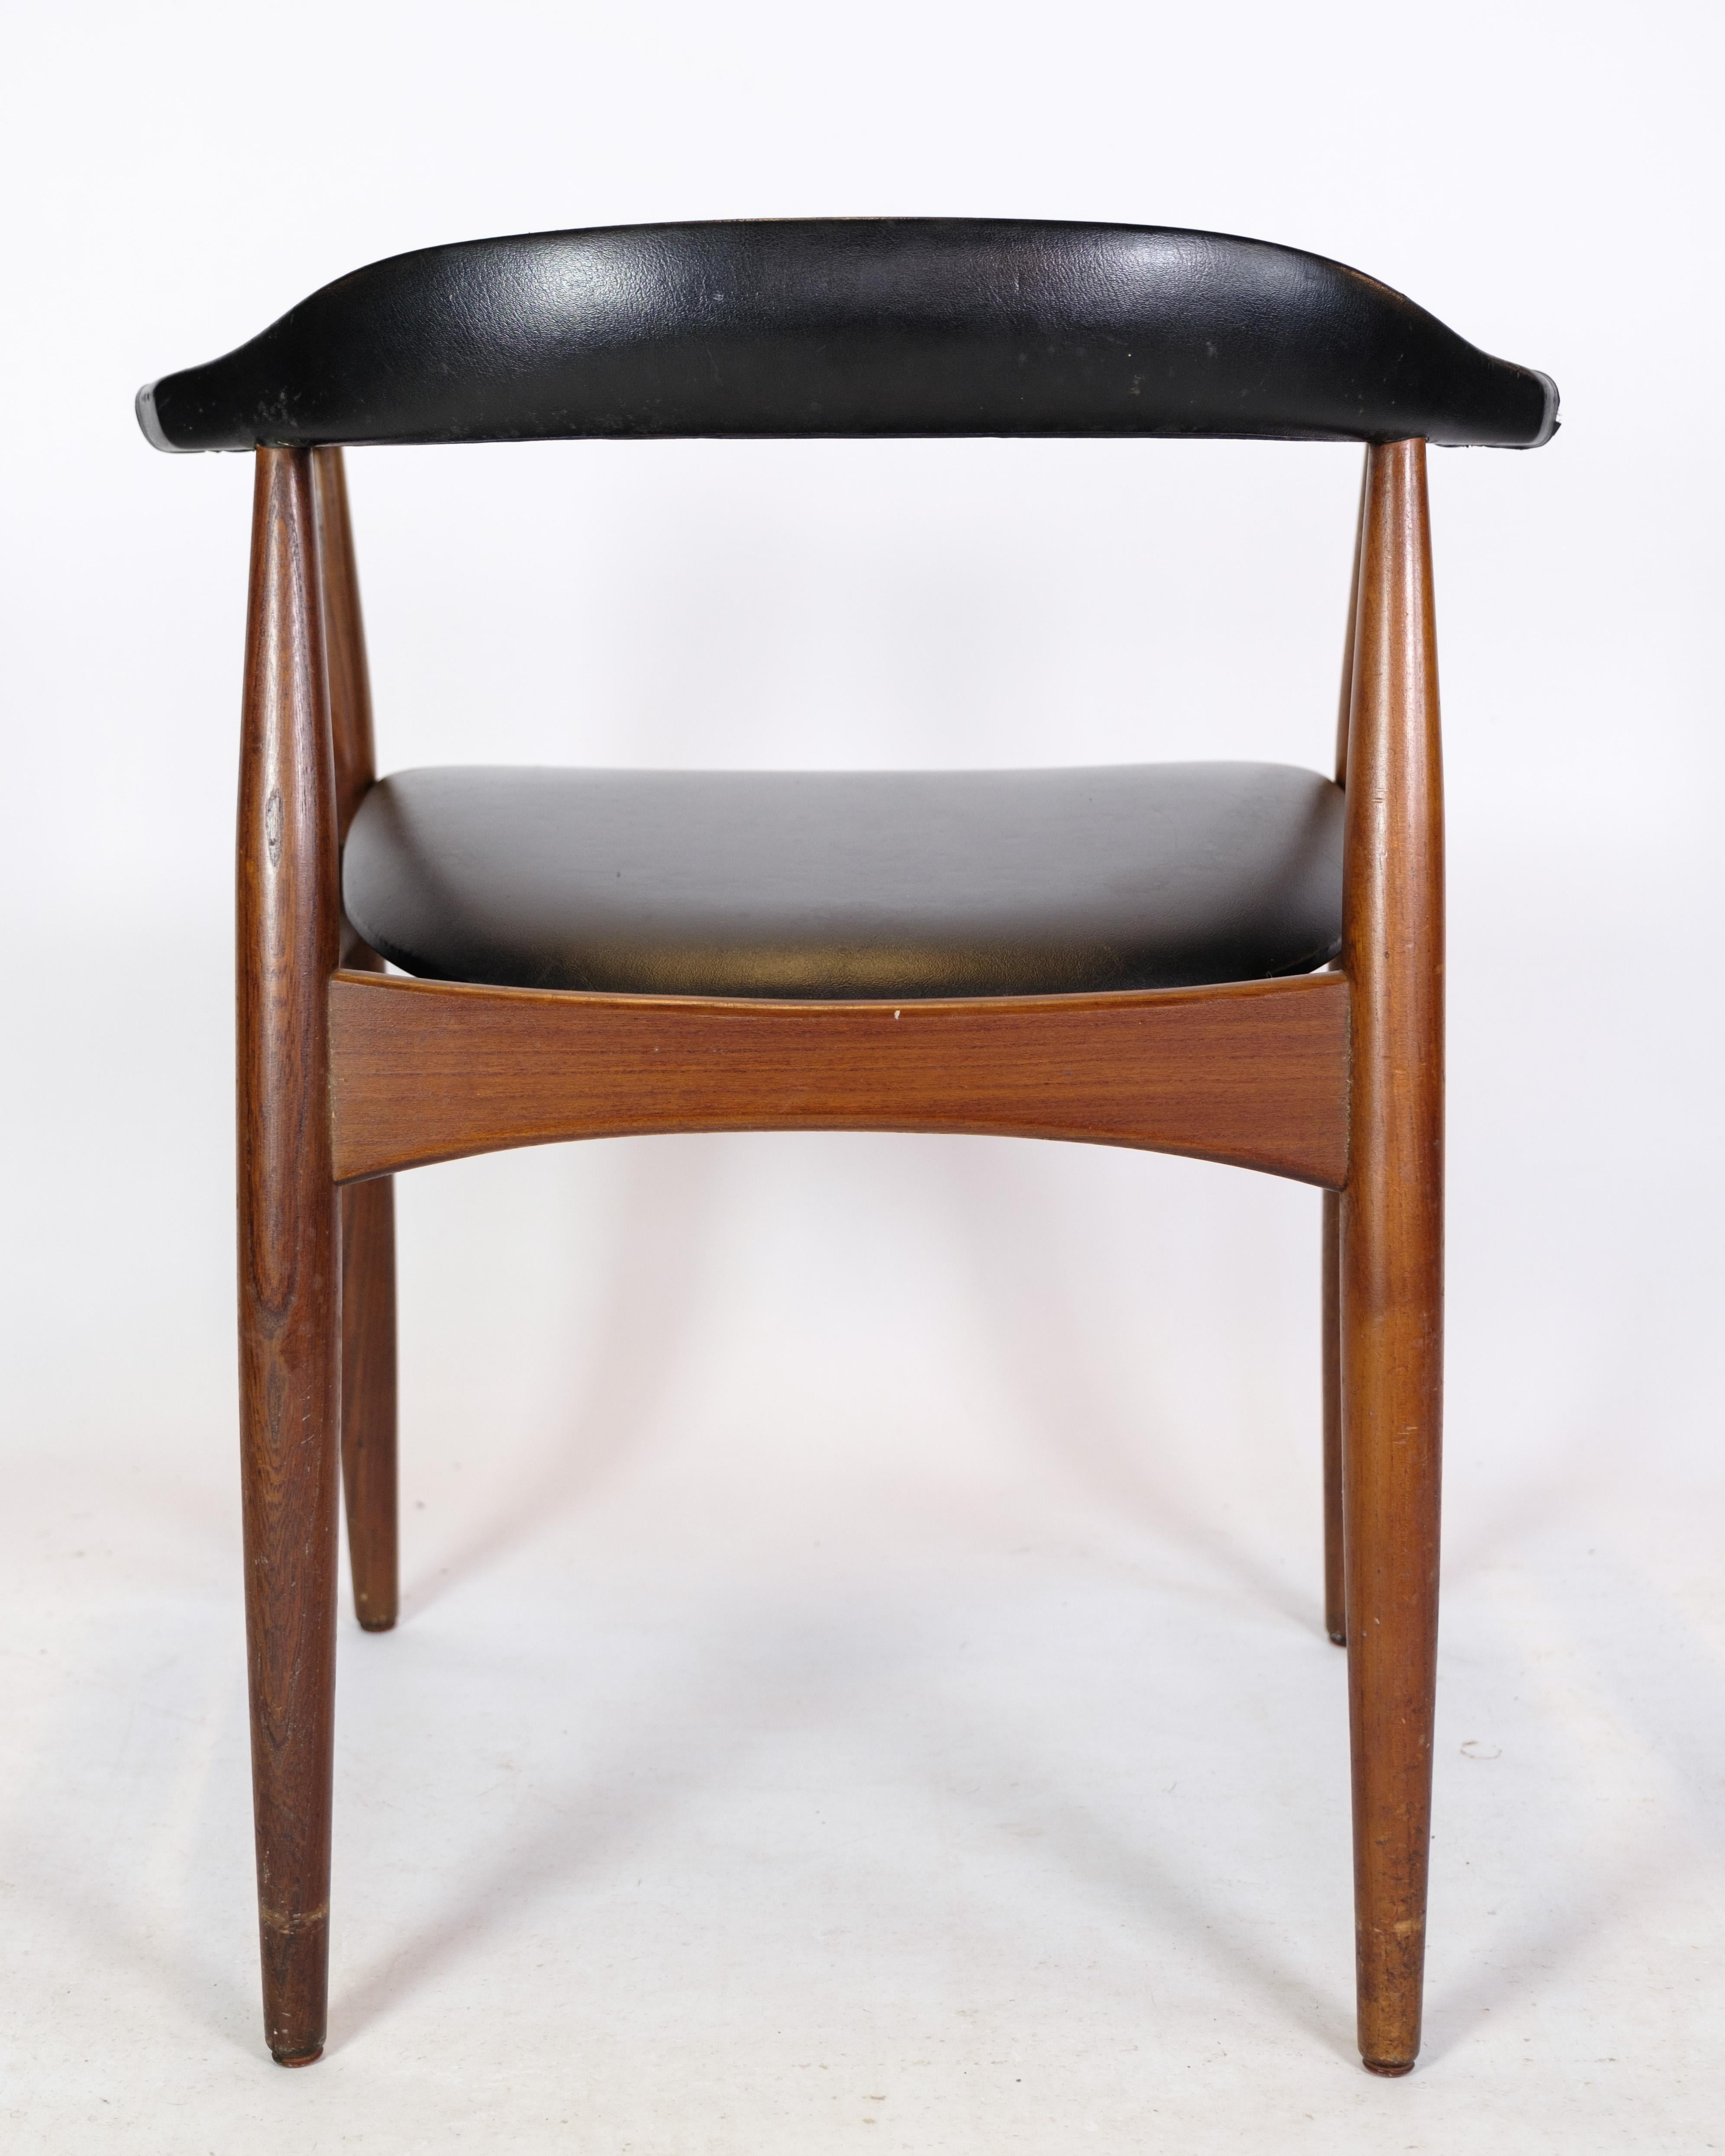 Mid-20th Century Armchair in Teak Wood and Black Leather by Illum Wikkelsø & Niels Eilersen 1960 For Sale